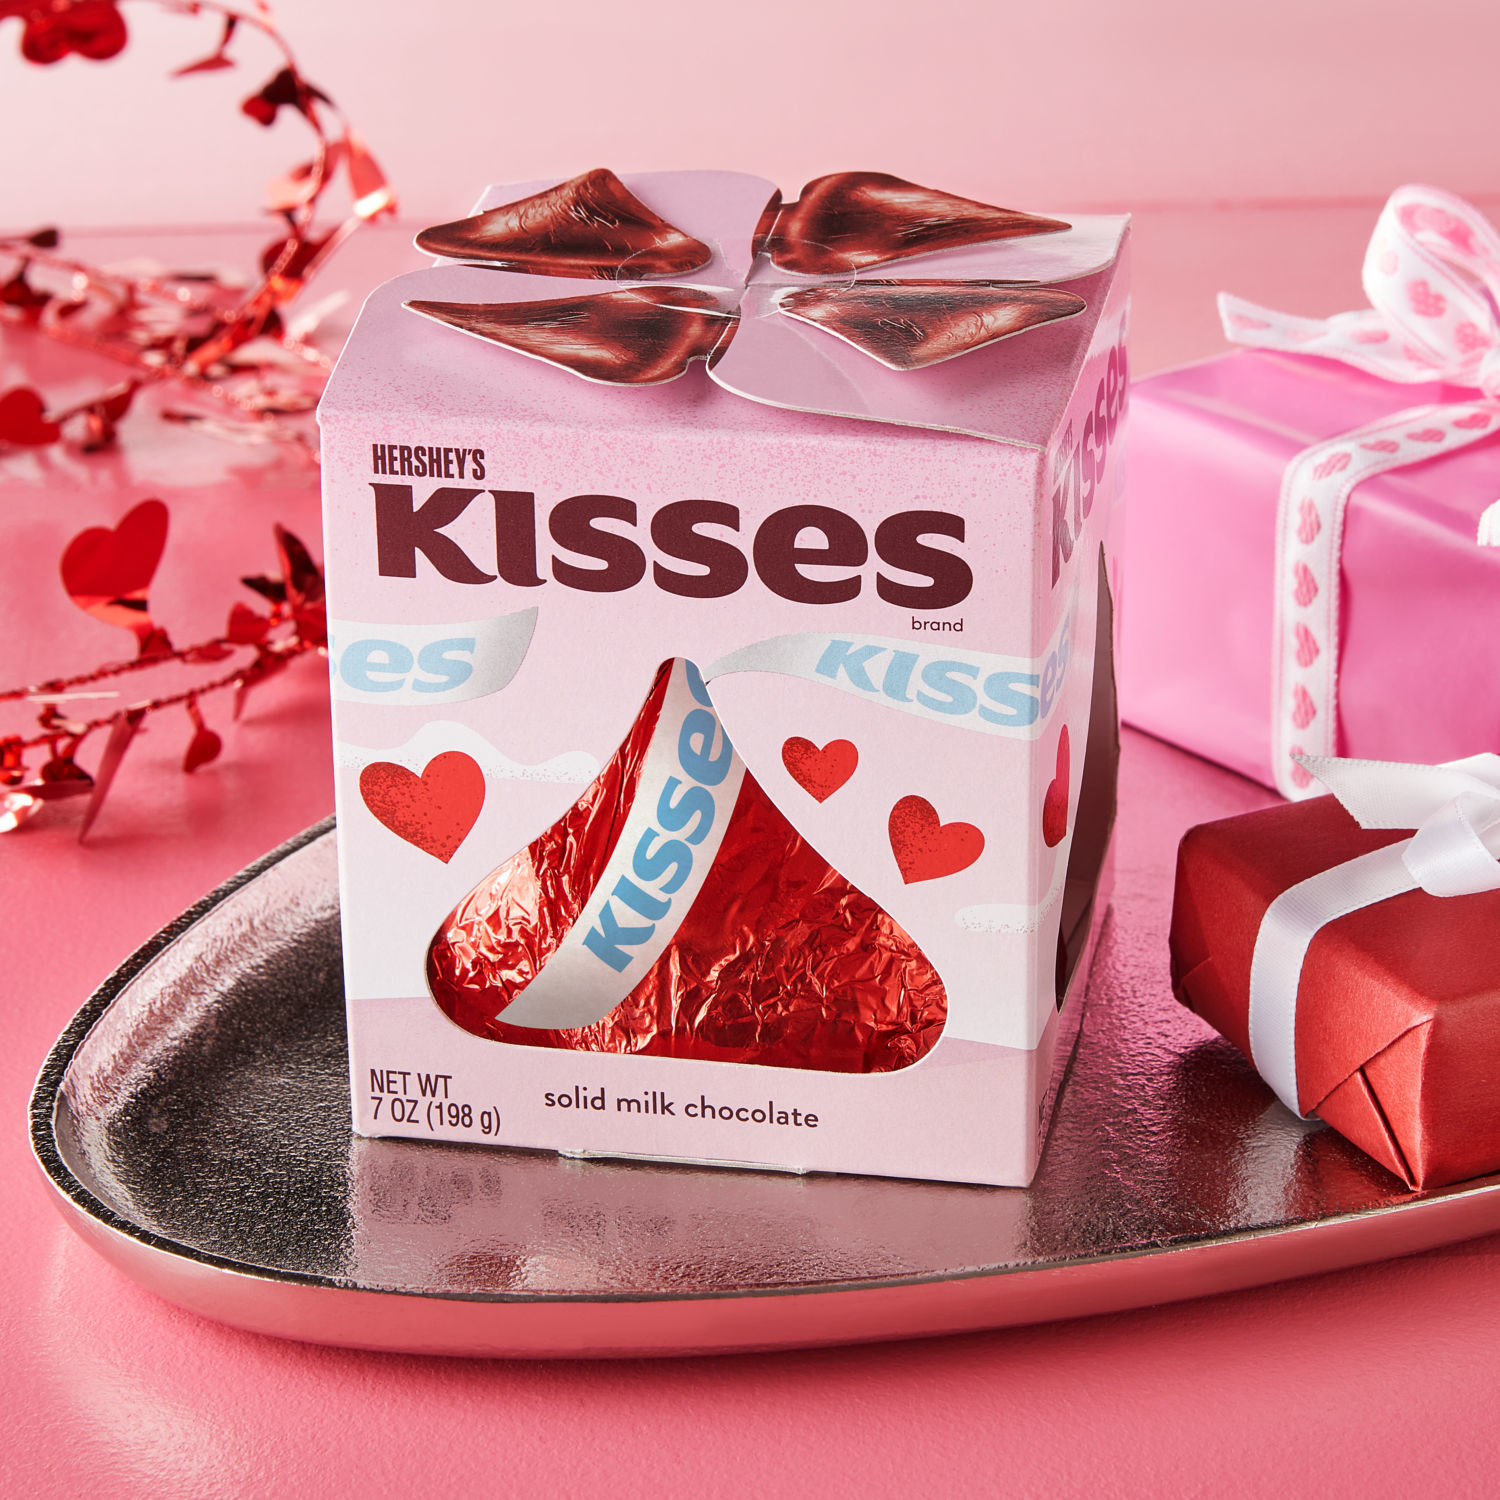 Hershey's Kisses Solid Milk Chocolate Valentine's Day Candy, Gift Box 7 oz - image 4 of 6